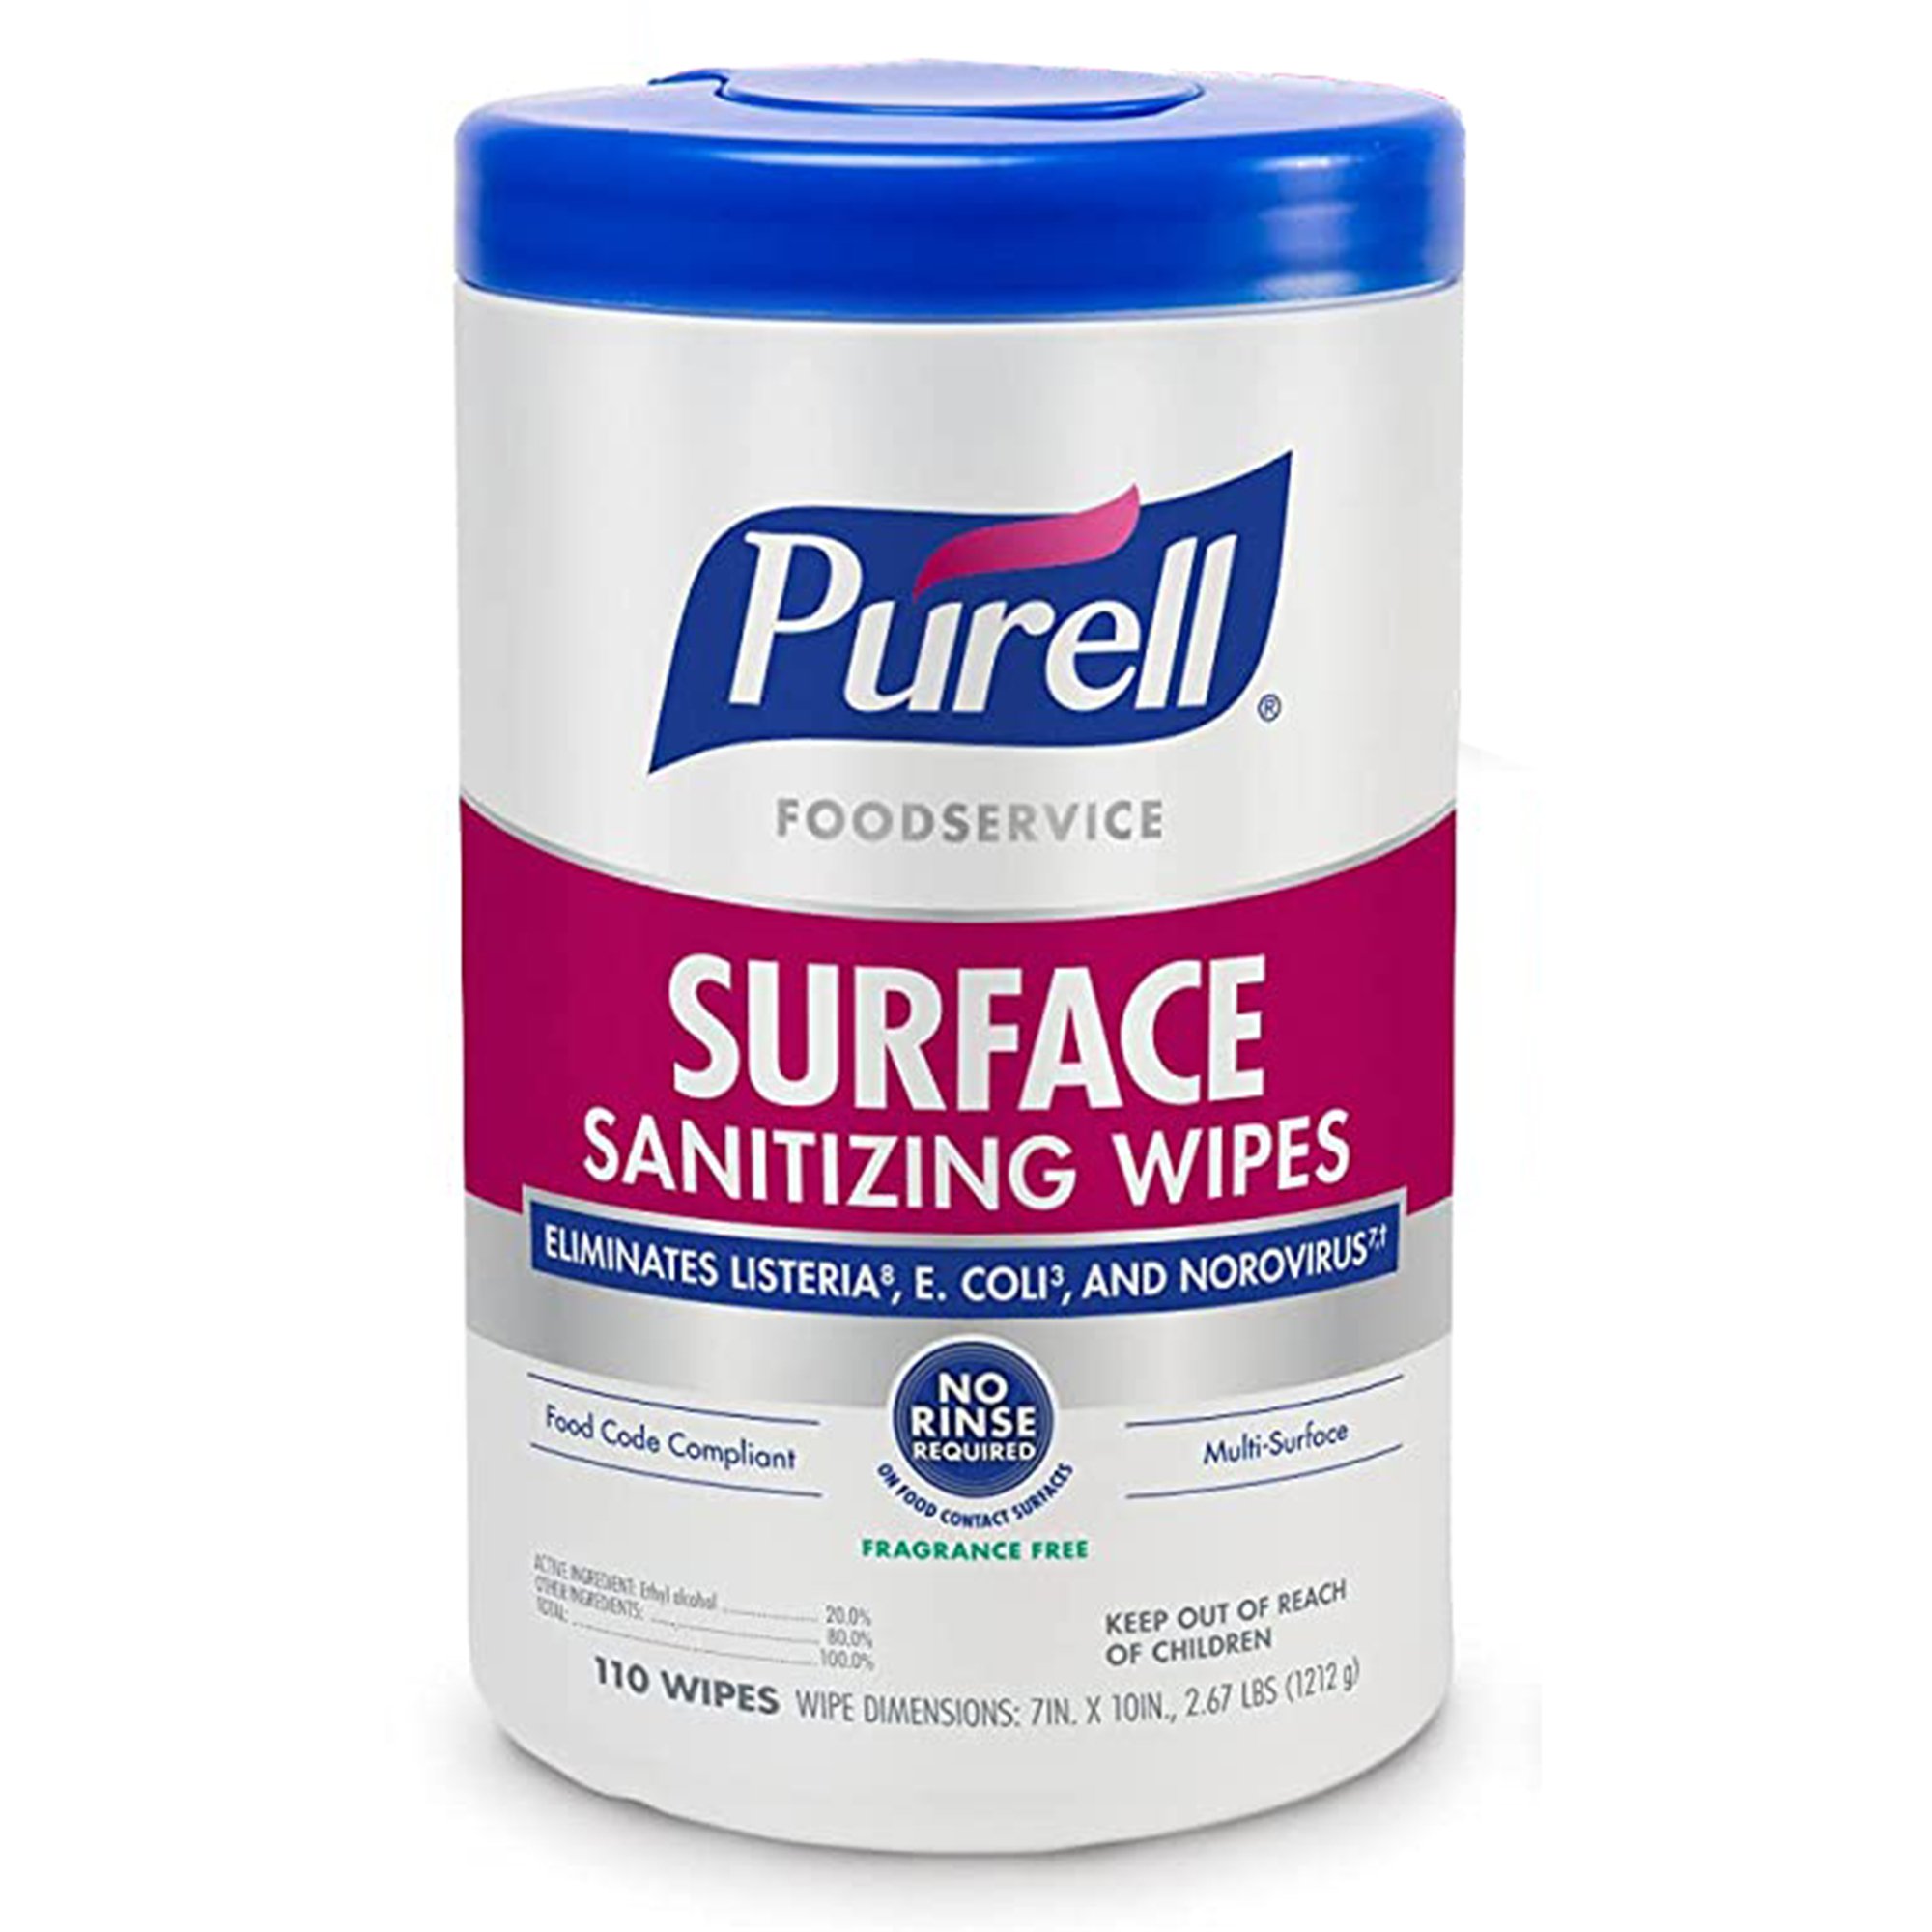 PURELL FOODSERVICE SANITIZING WIPES - Wipes